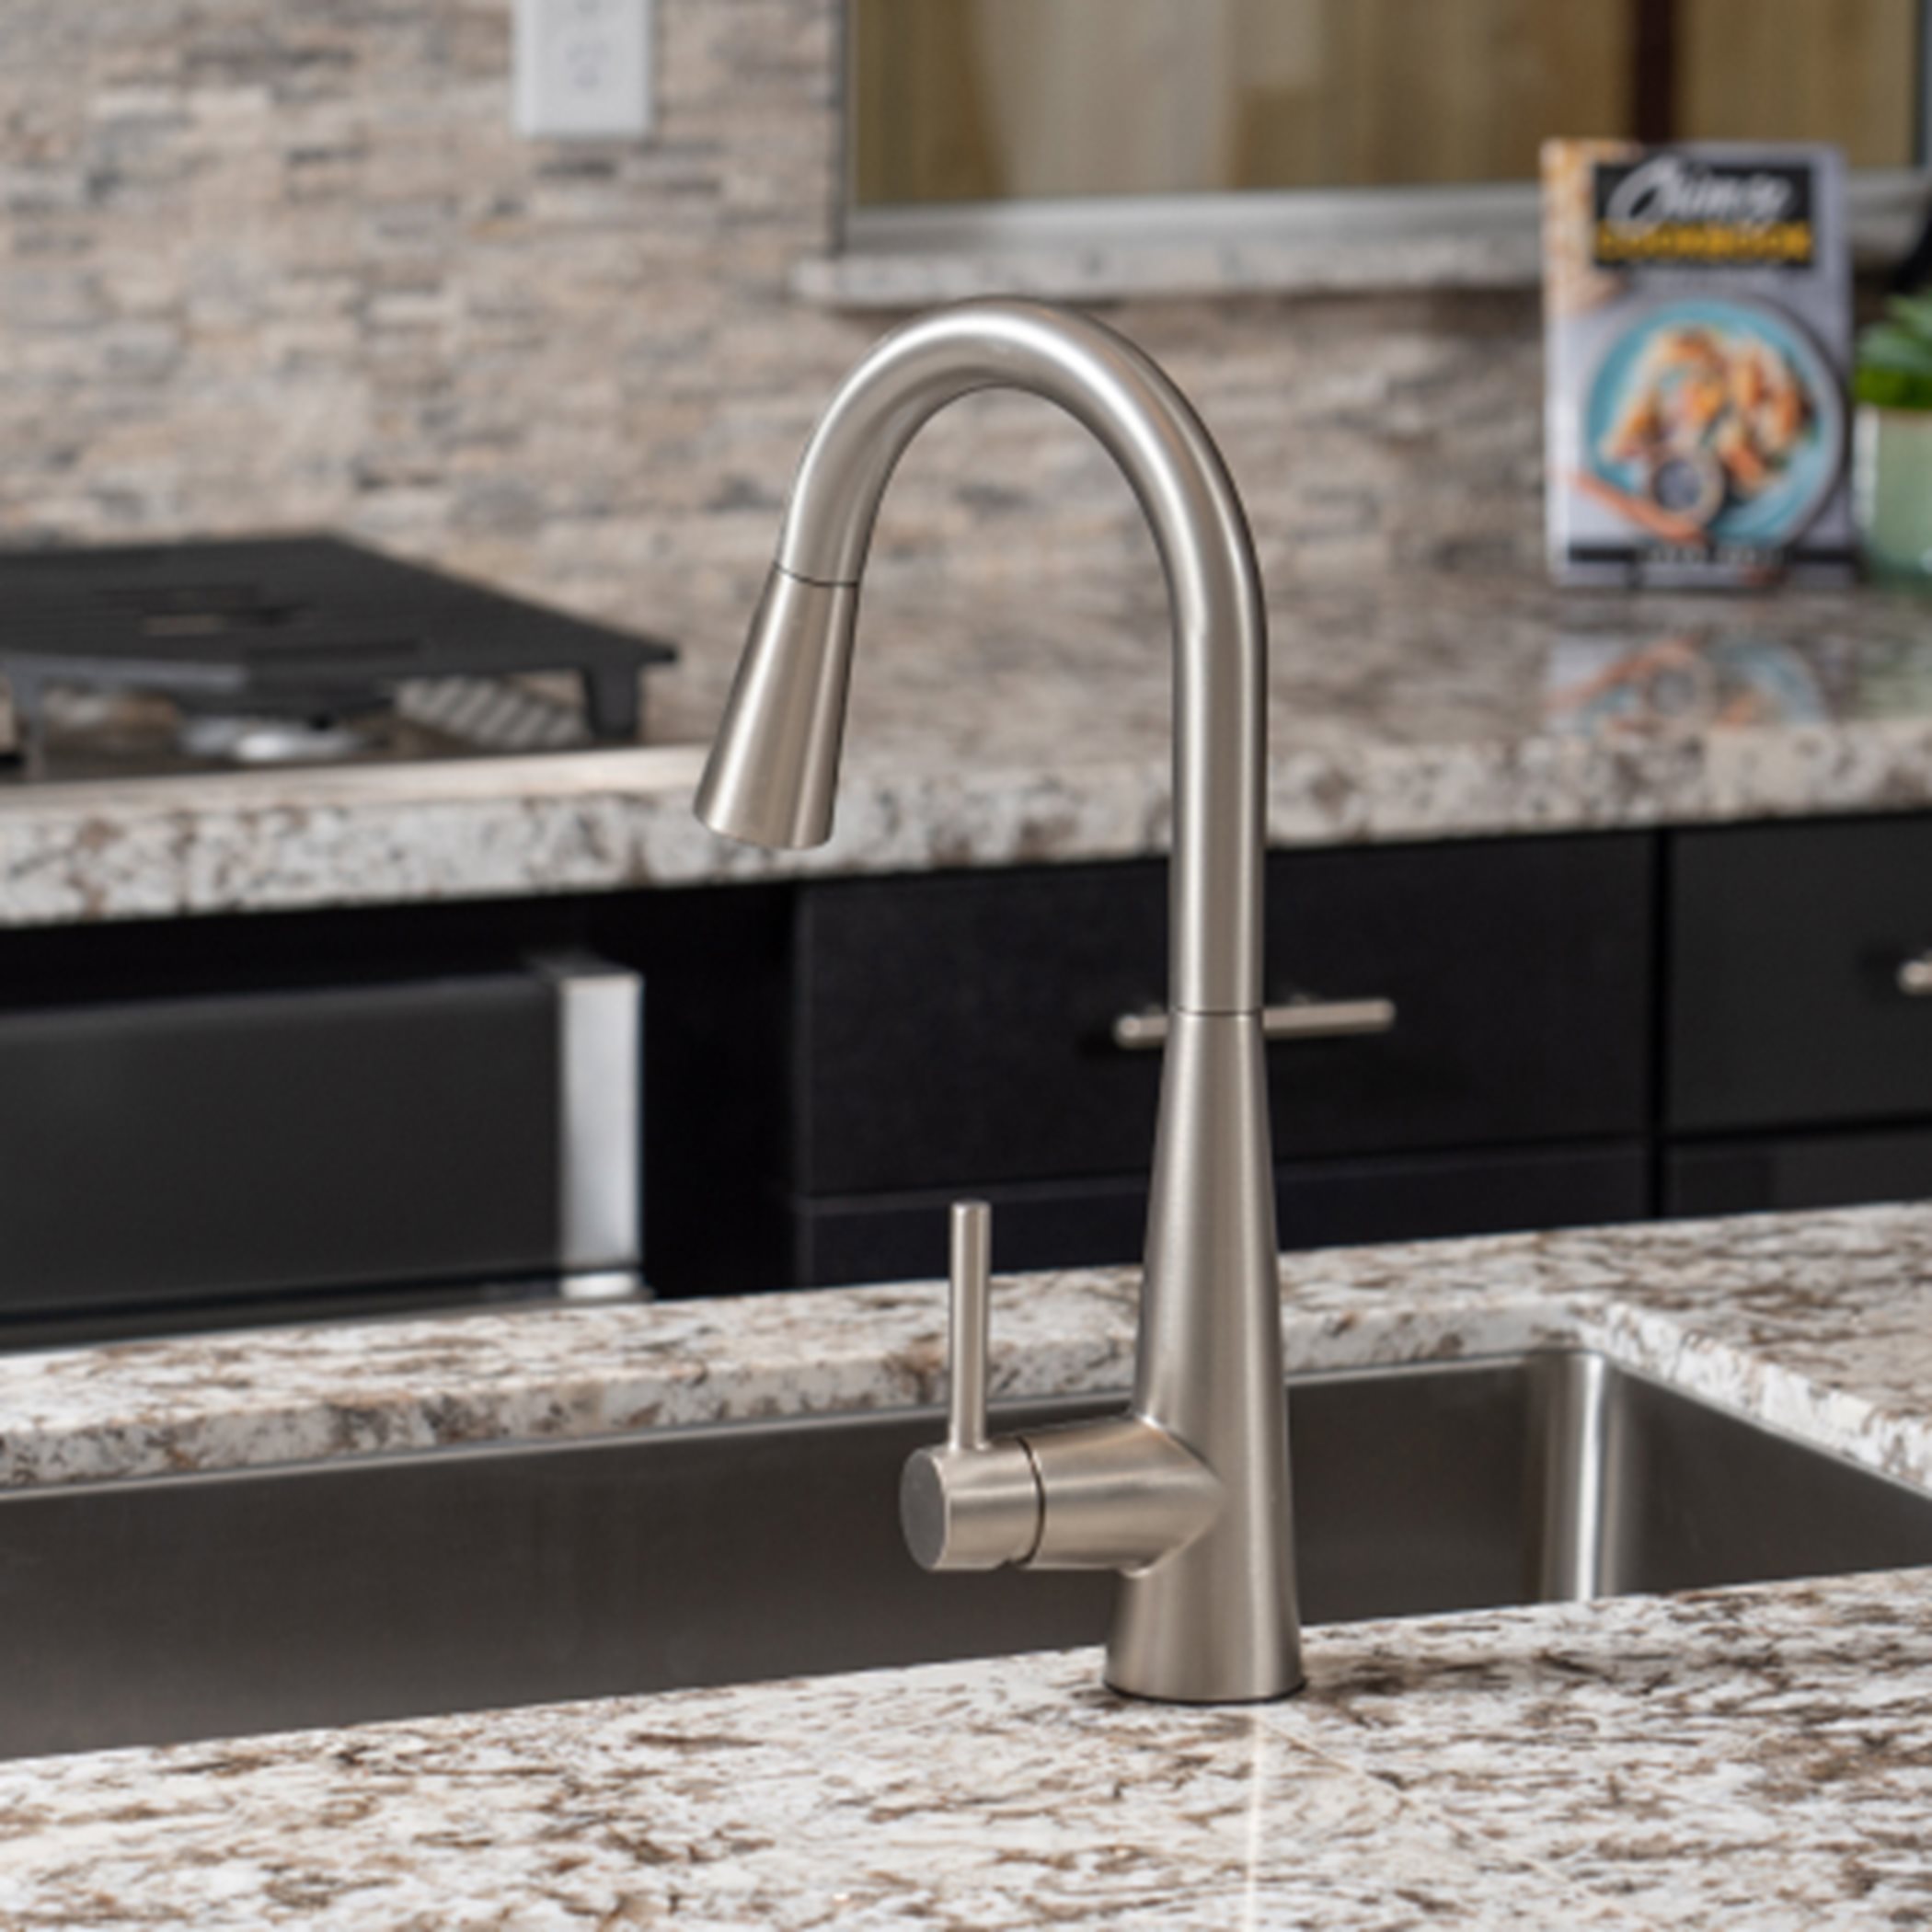 Residence 2079 Kitchen faucet